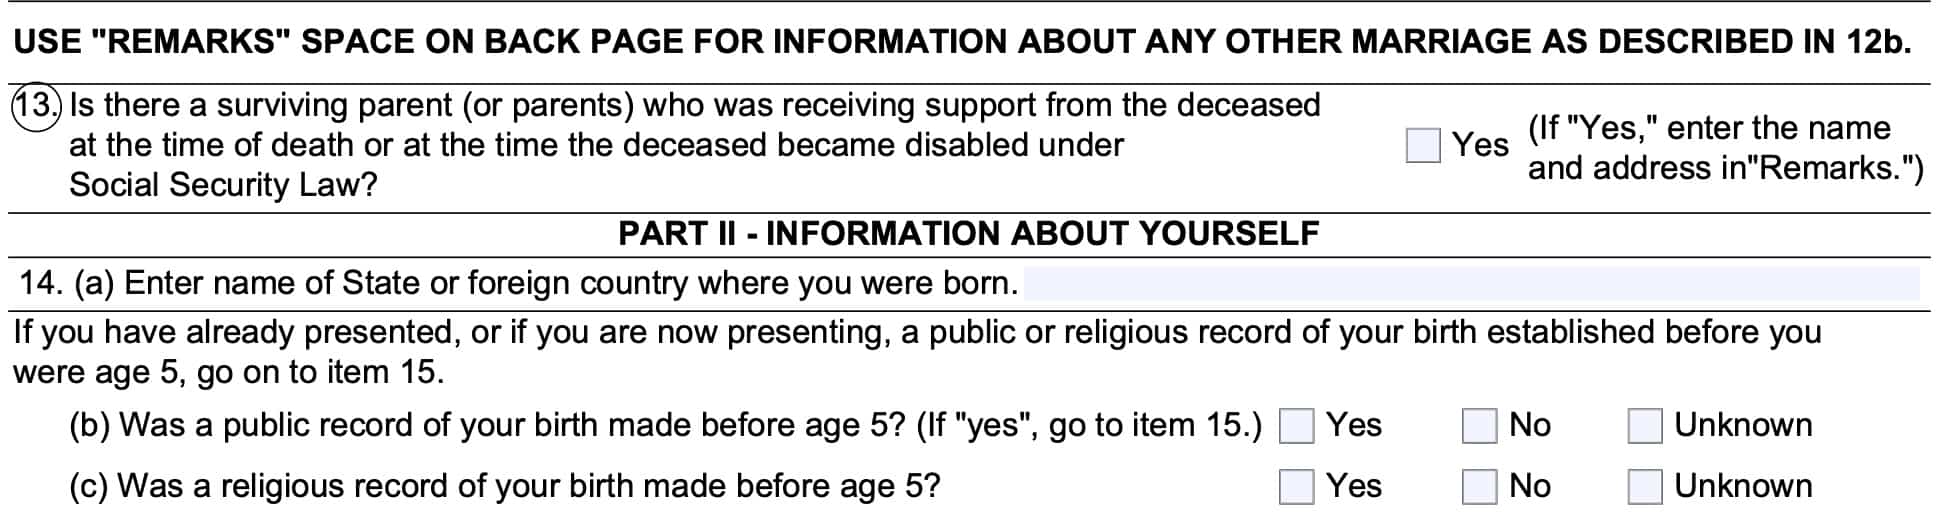 Form ssa-10, Line 13 contains information about surviving parents while line 14 states the name of the state or country the applicant was born in